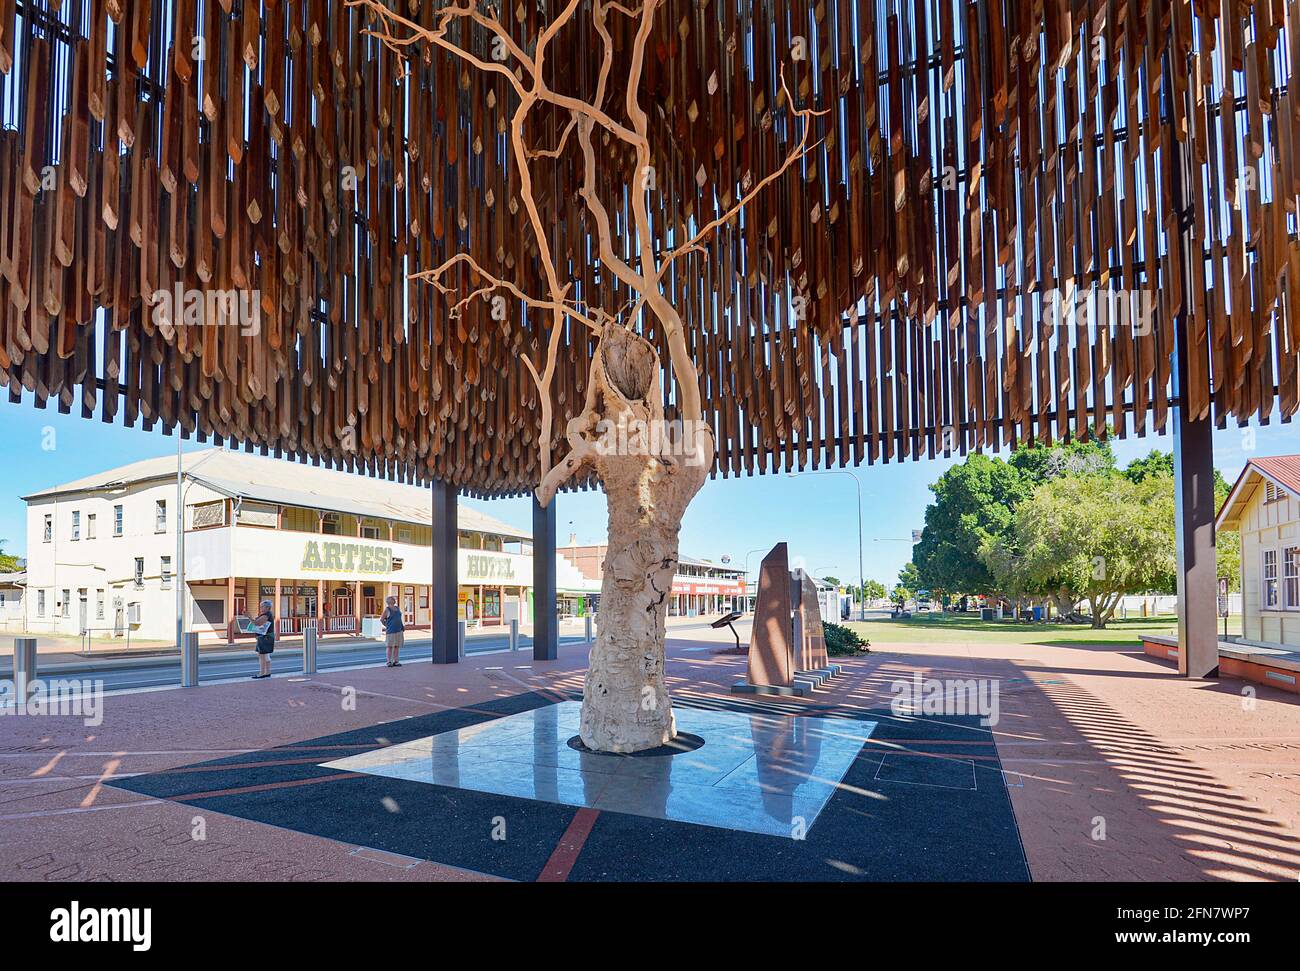 The Tree of Knowledge under which the Australian Labor Party was formed during the 1891 National Shearers' Strike, Barcaldine, Queensland, QLD, Austra Stock Photo